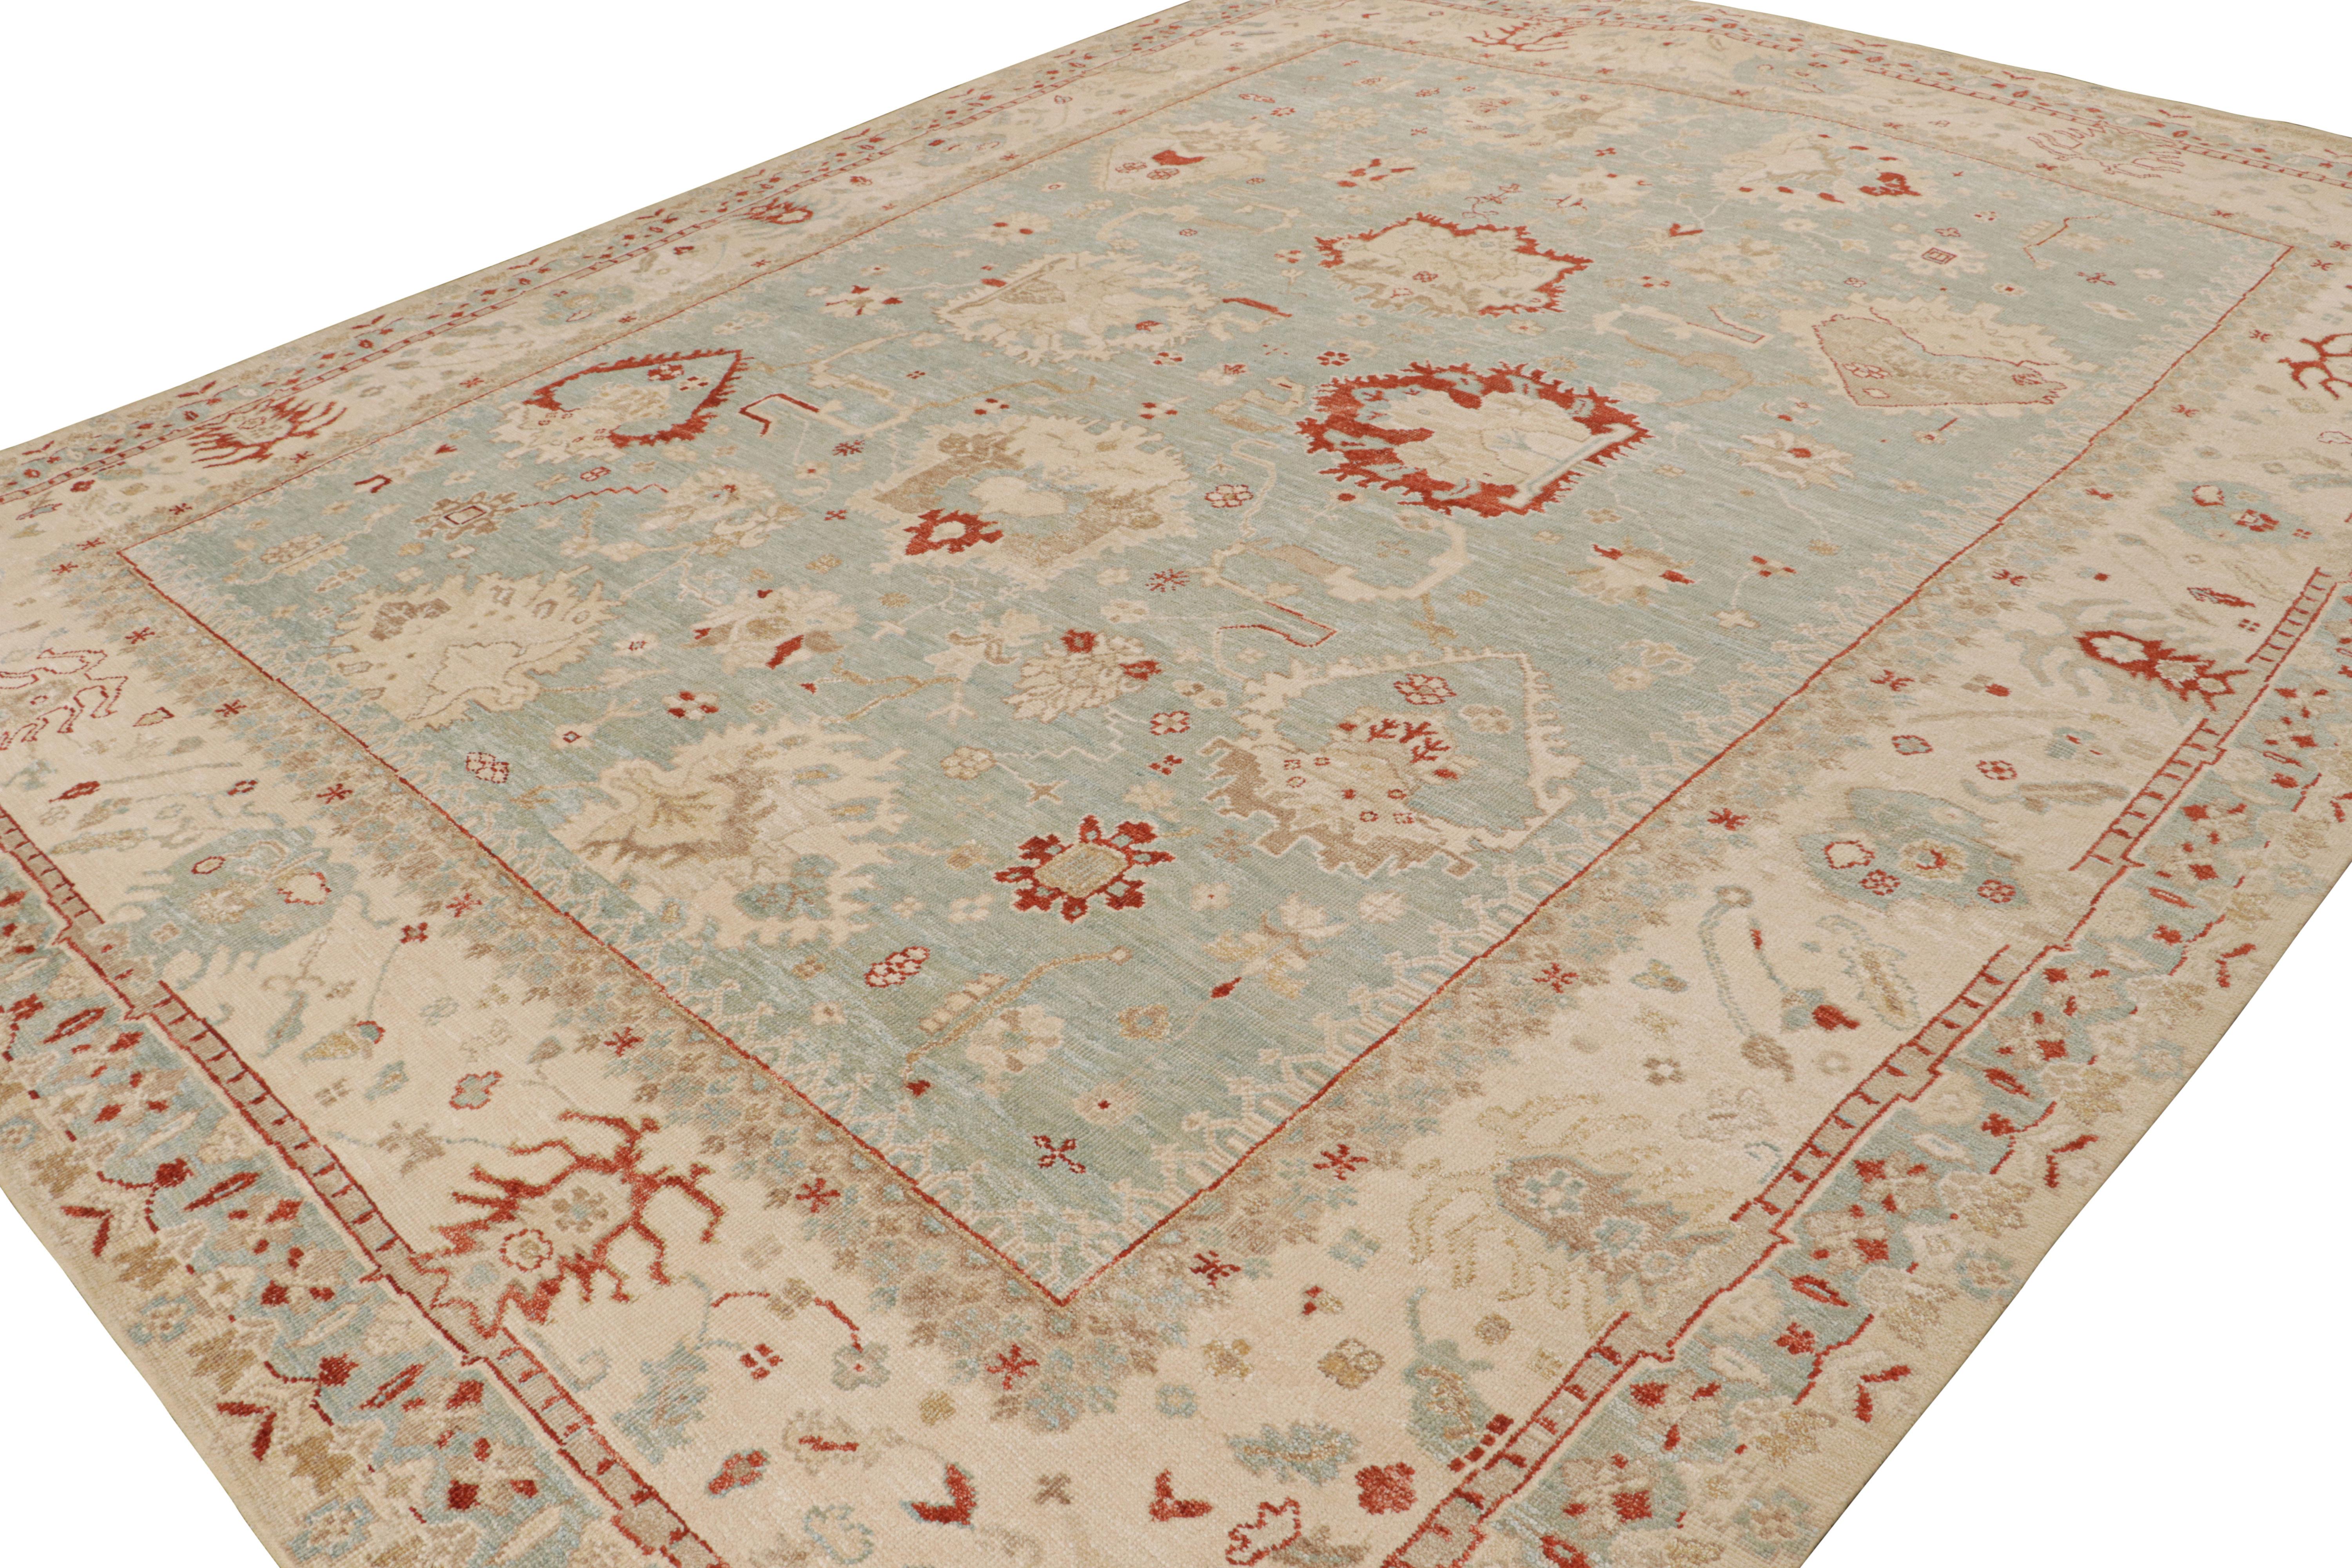 This 12x15 rug from the Modern Classics Collection features a sky blue field, beige borders and rich red tones along with geometric-floral patterns keeping with the Oushak style. 

On the design: 

Connoisseurs will admire that this rug is made with